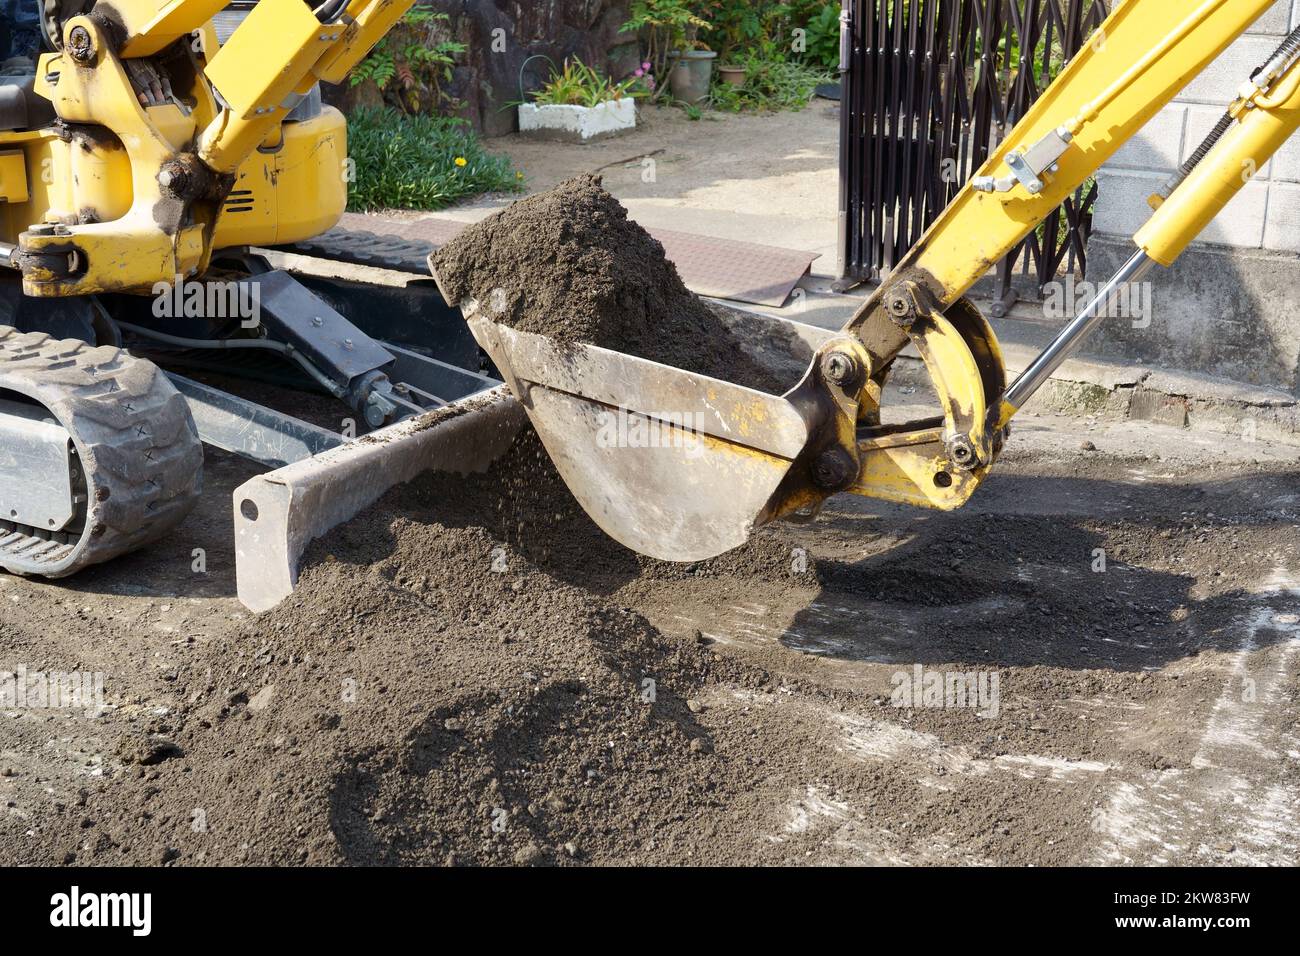 Repaving the road, The excavator is leveling gravel on the road, making a base for laying the asphalt. Stock Photo